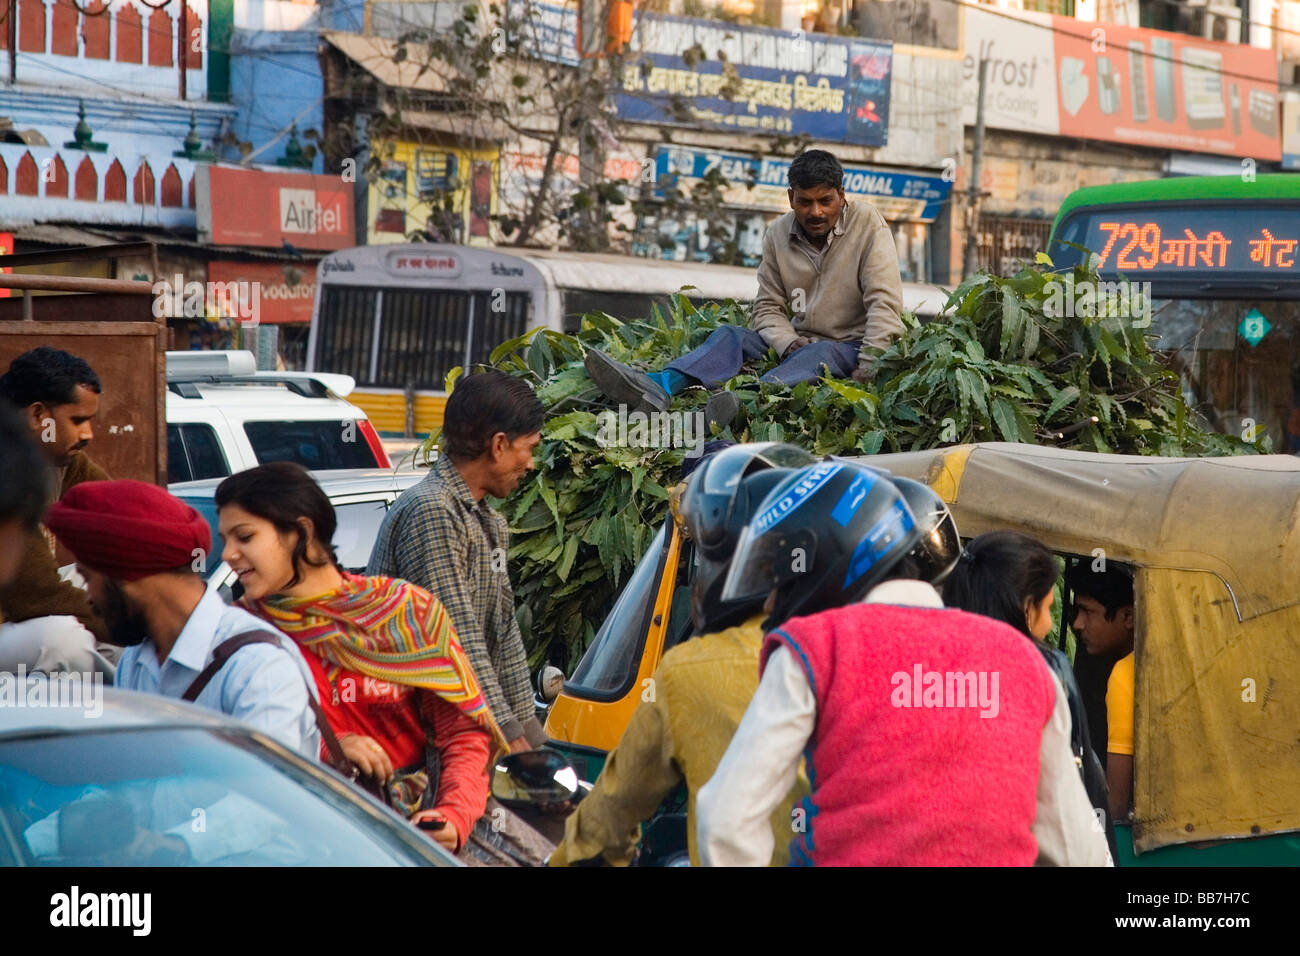 Street life on an Indian shopping street, North India, India, Asia Stock Photo